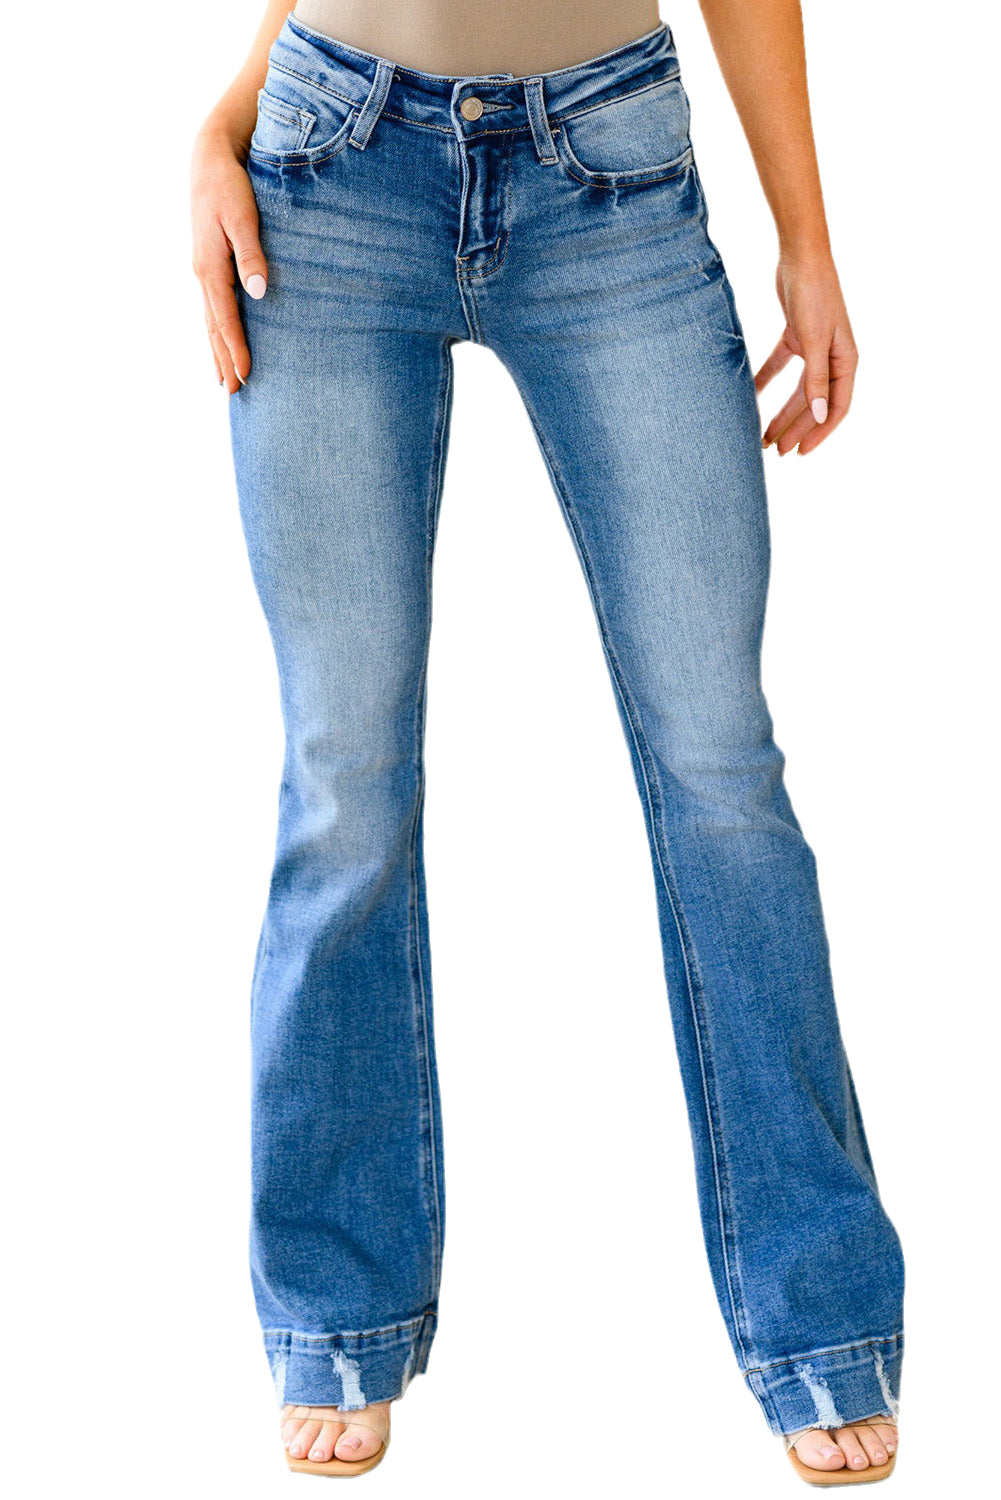 Sky Blue Slight Distressed Washed Flare Jeans